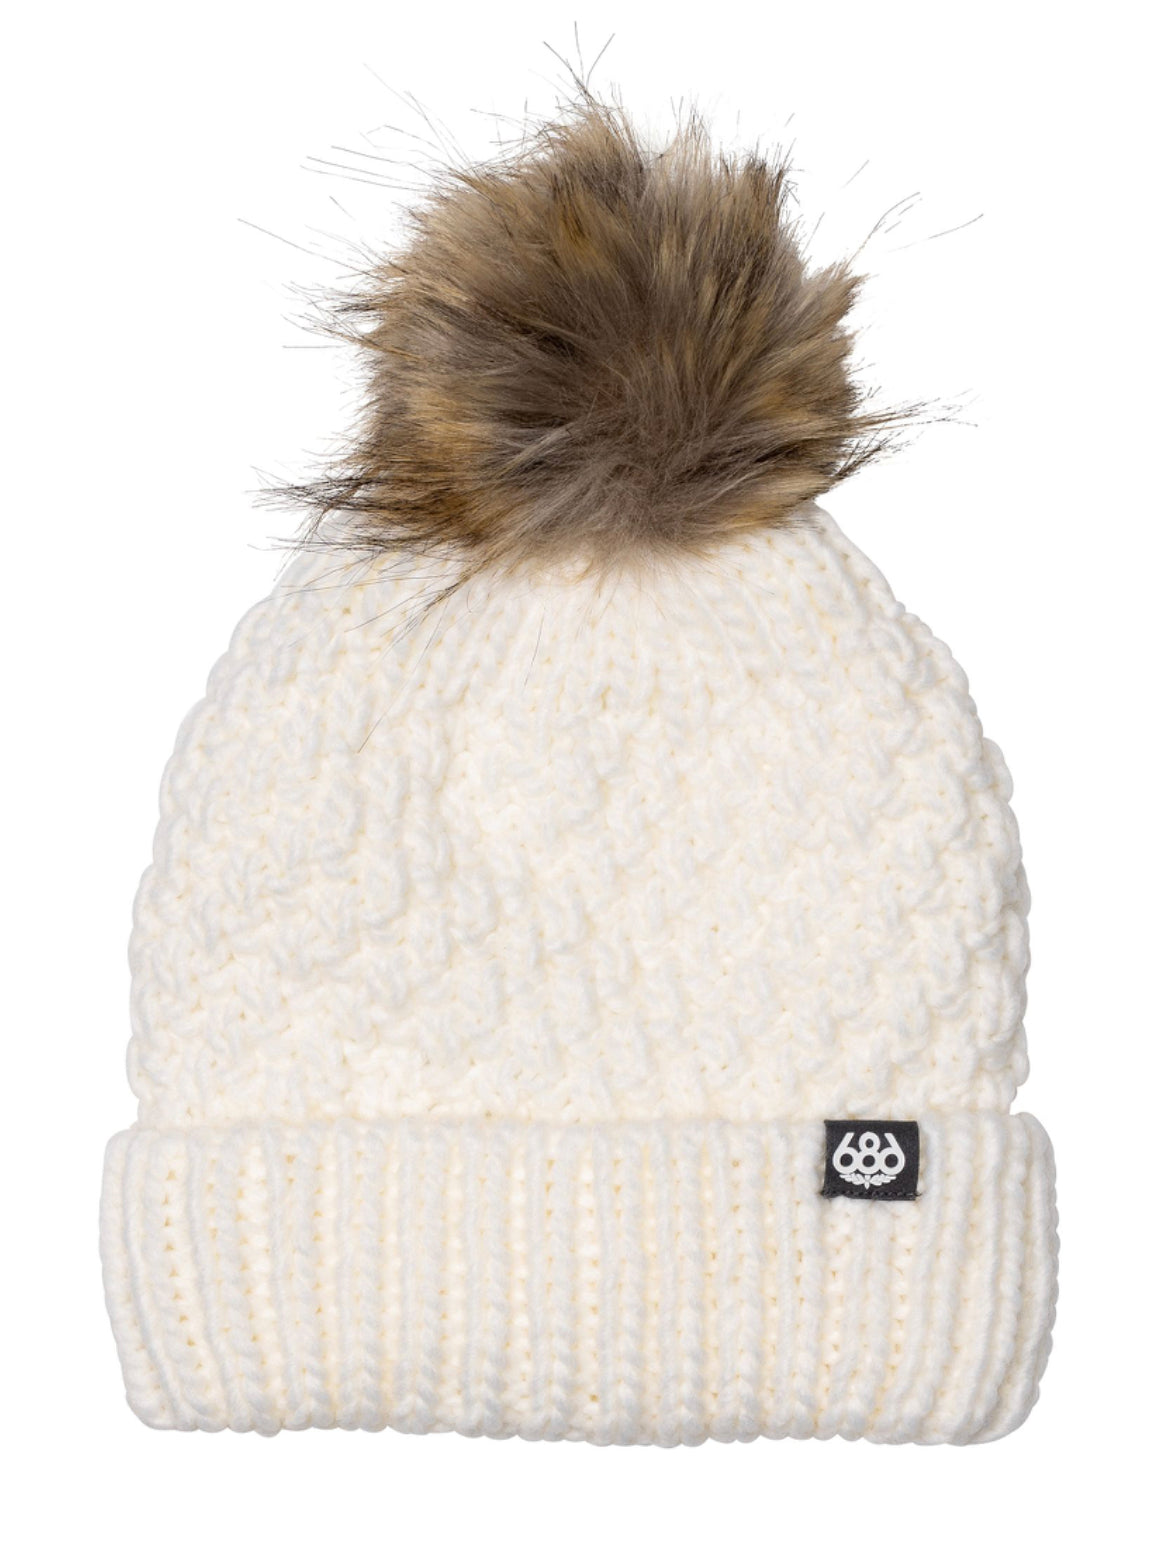 686 - Women’s Majesty Cable Knit Beanie